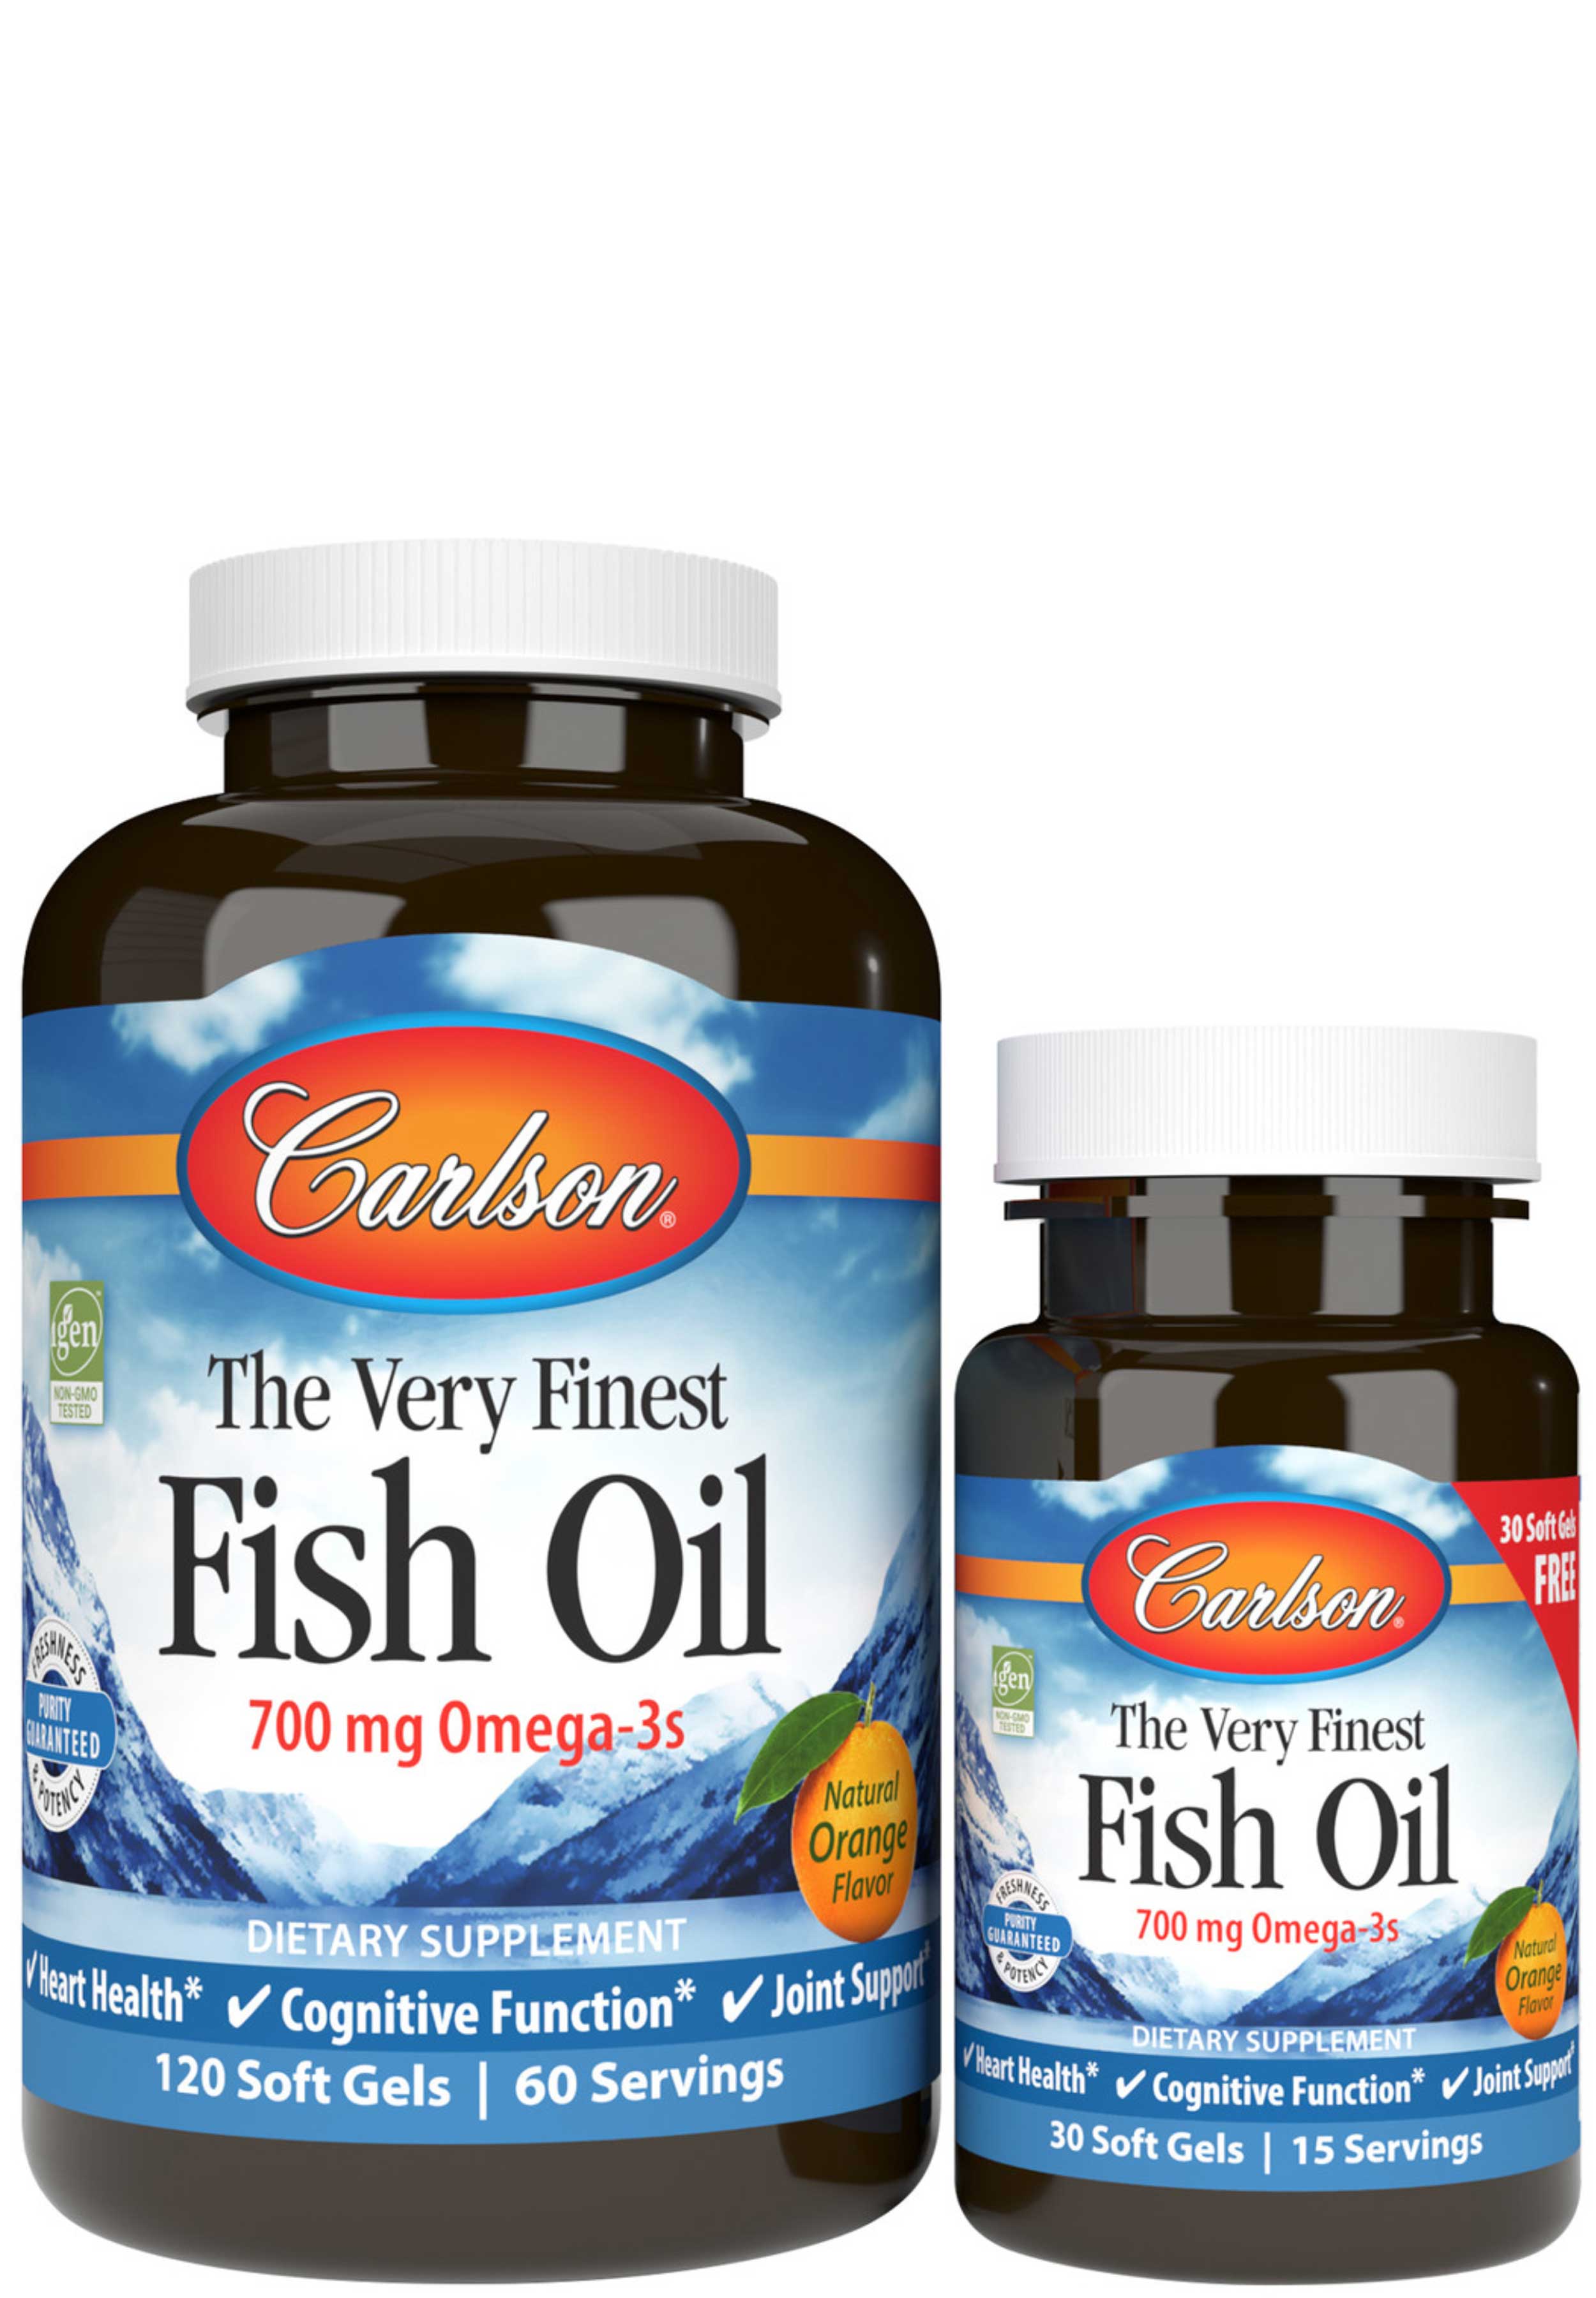 Carlson Labs The Very Finest Fish Oil 700 mg Omega-3s, Orange